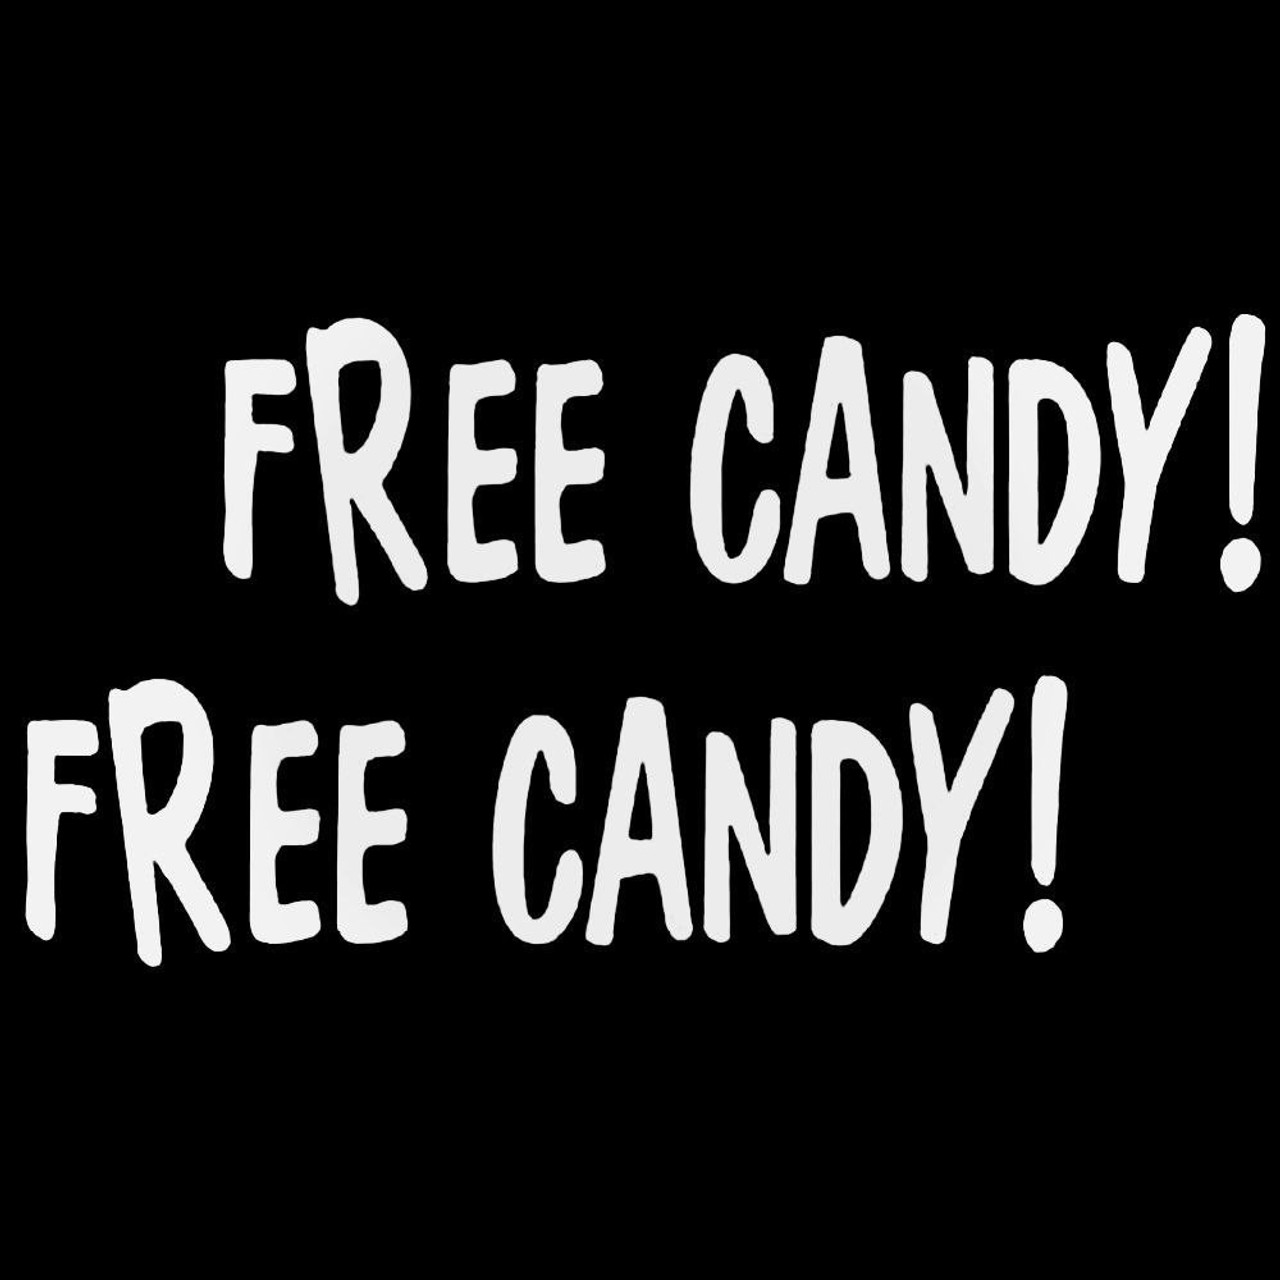 Free Candy Decal Sticker